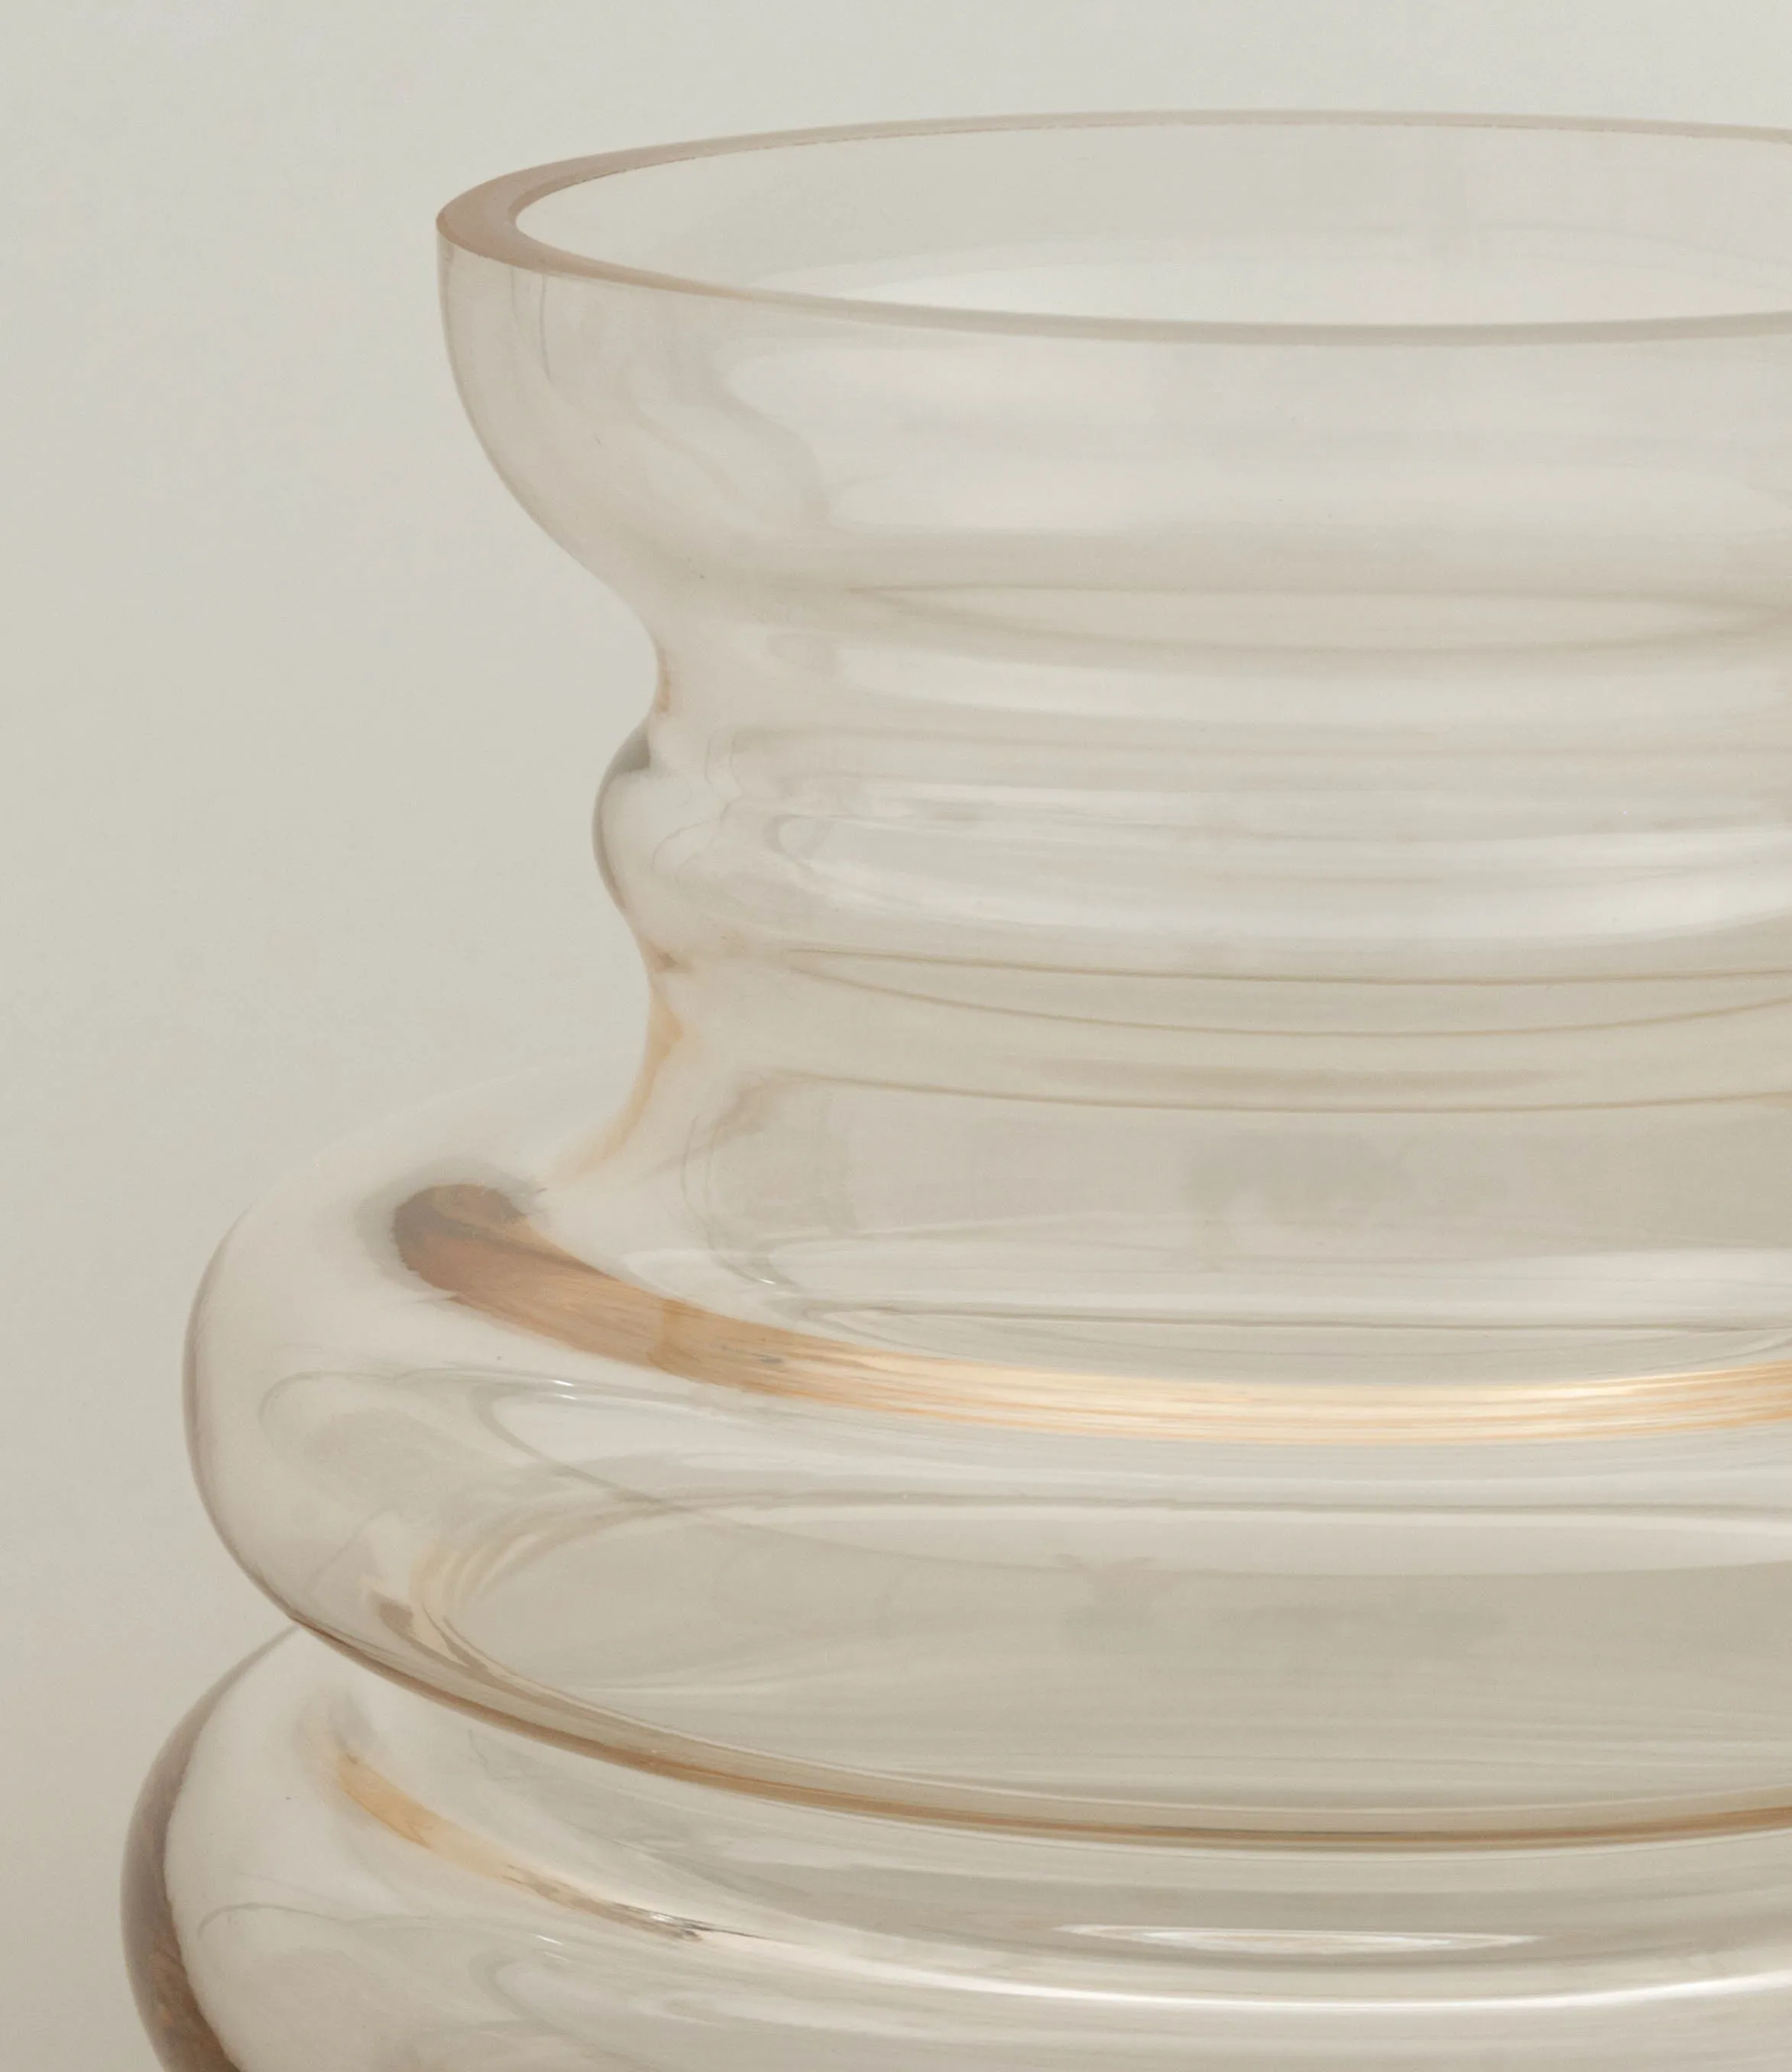 Closeup of the Curve Gul Vase product from Stences